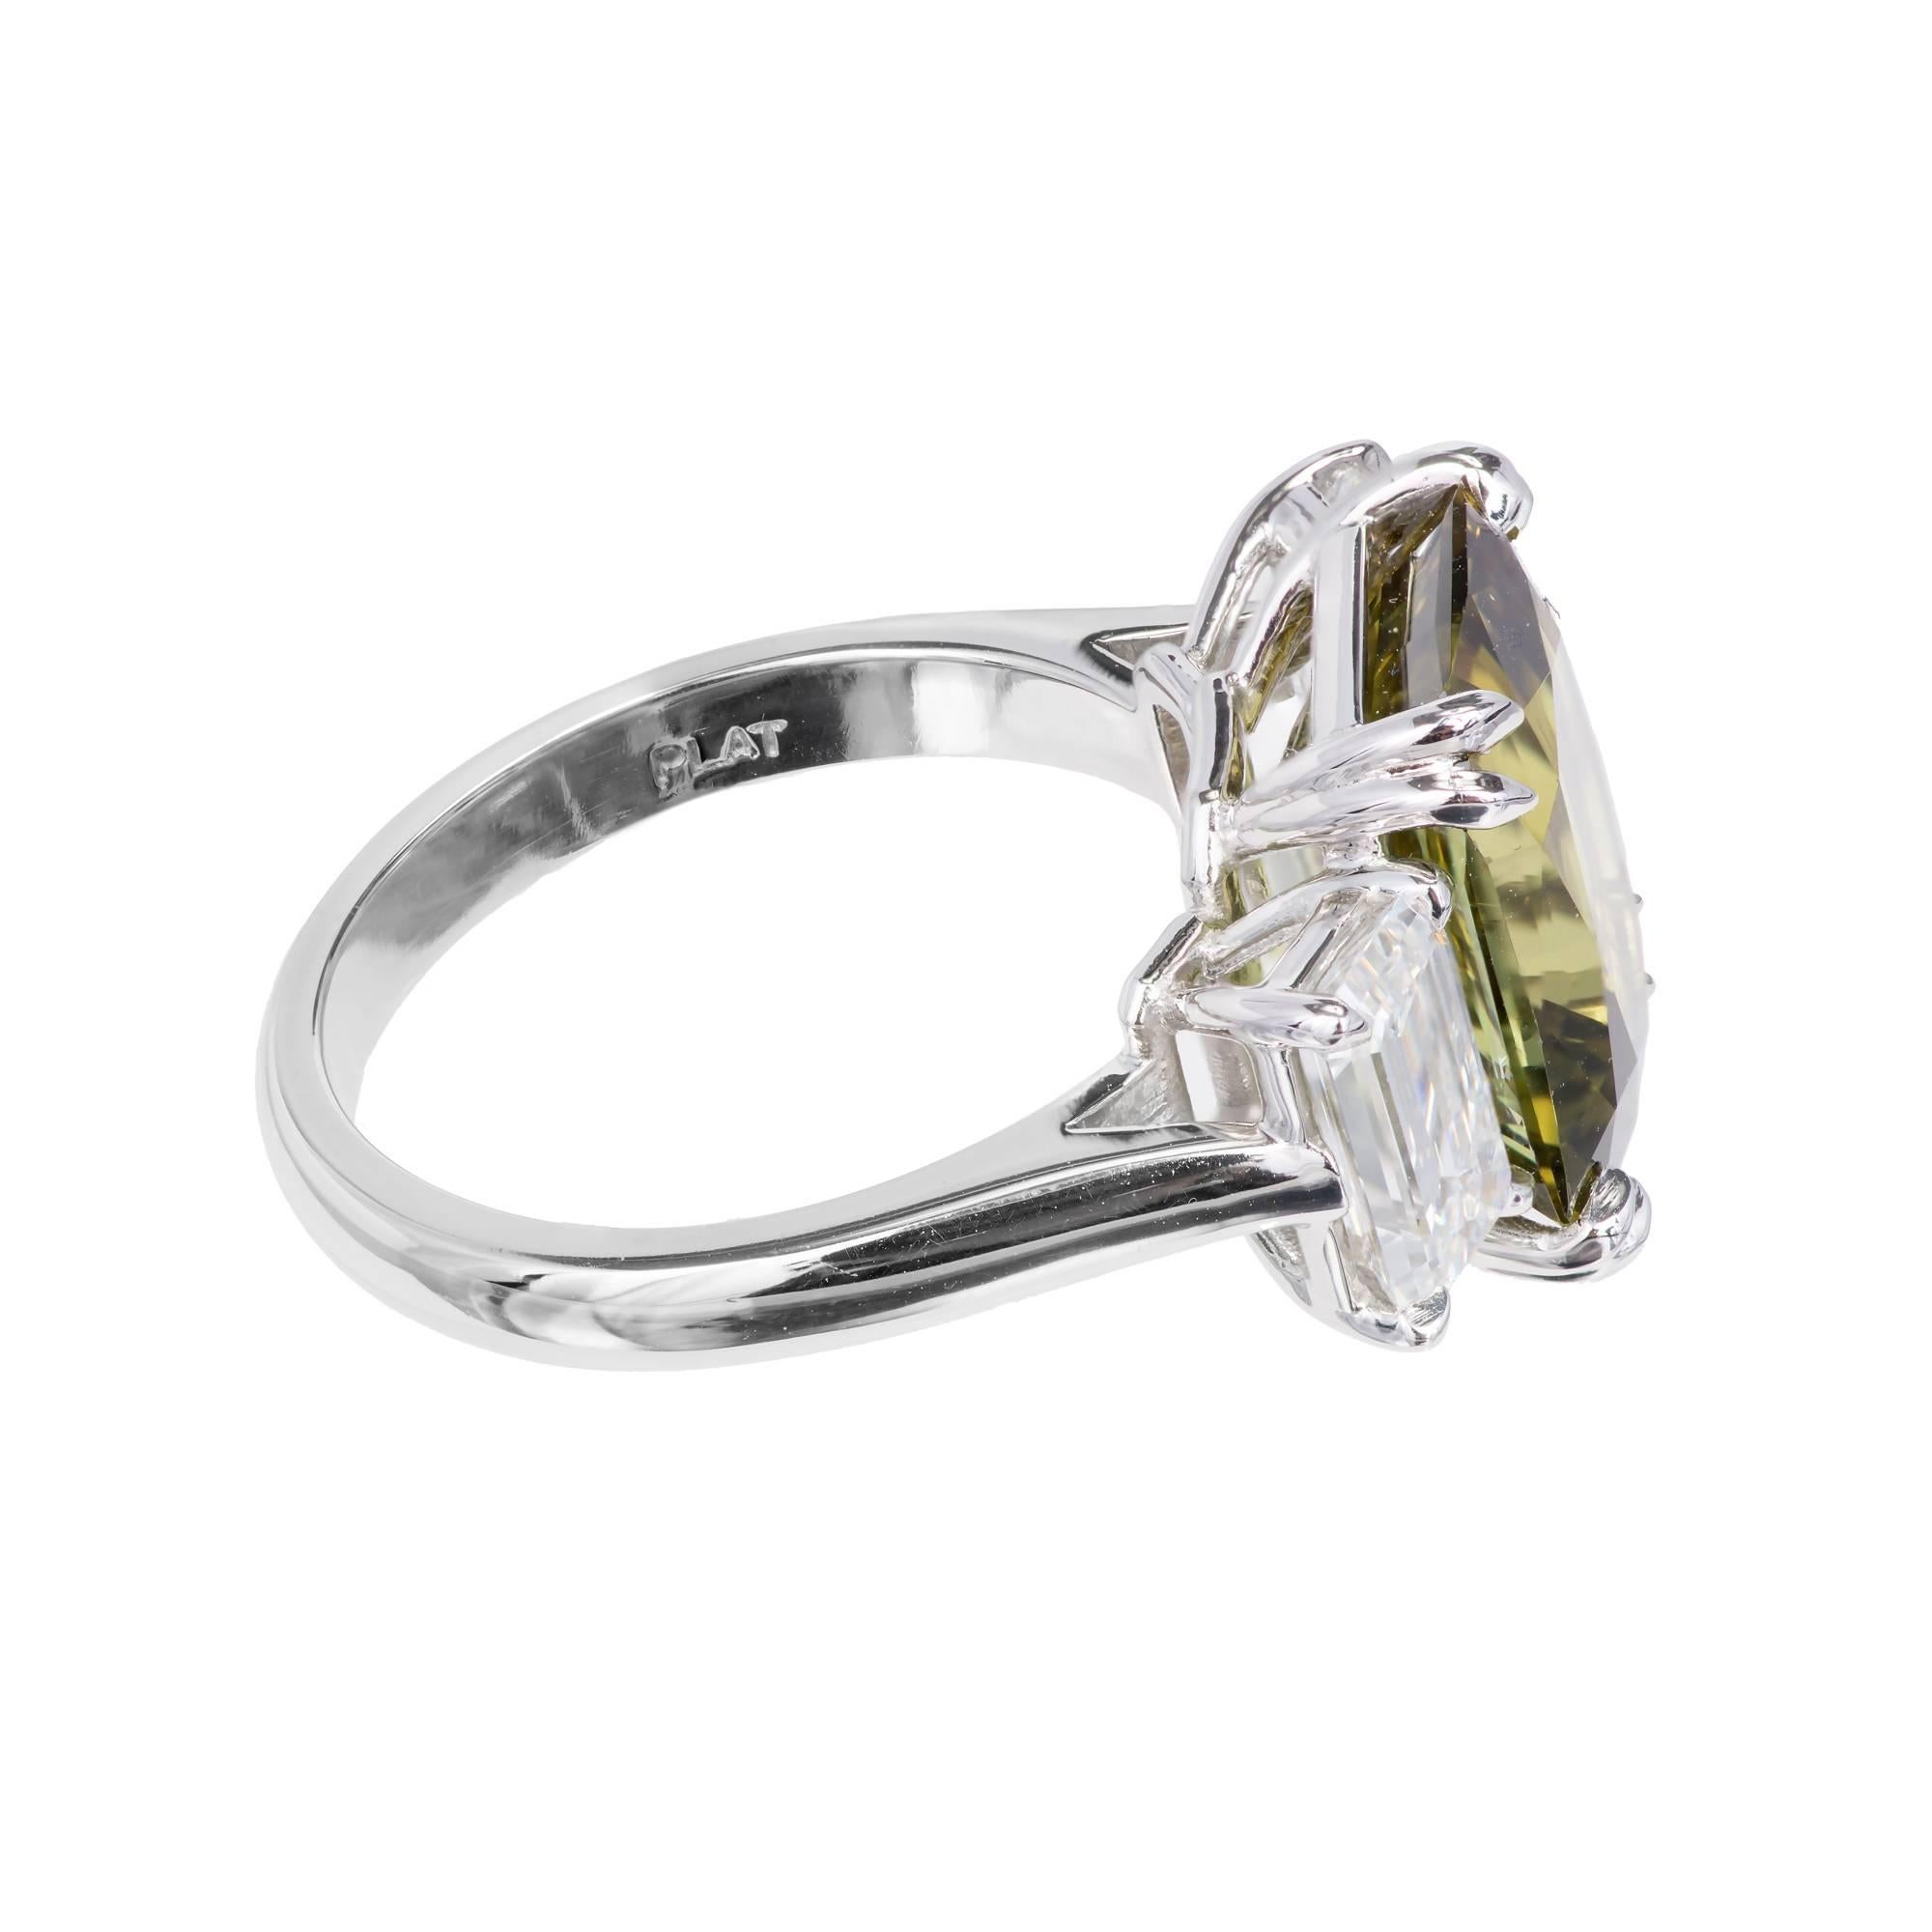 Peter Suchy emerald step-cut 7.68ct natural alexandrite engagement ring with D color emerald-cut diamonds. The stones are all GIA certified. The alexandrite has moderate to fair color change from yellow green to brown green. The setting is brand new